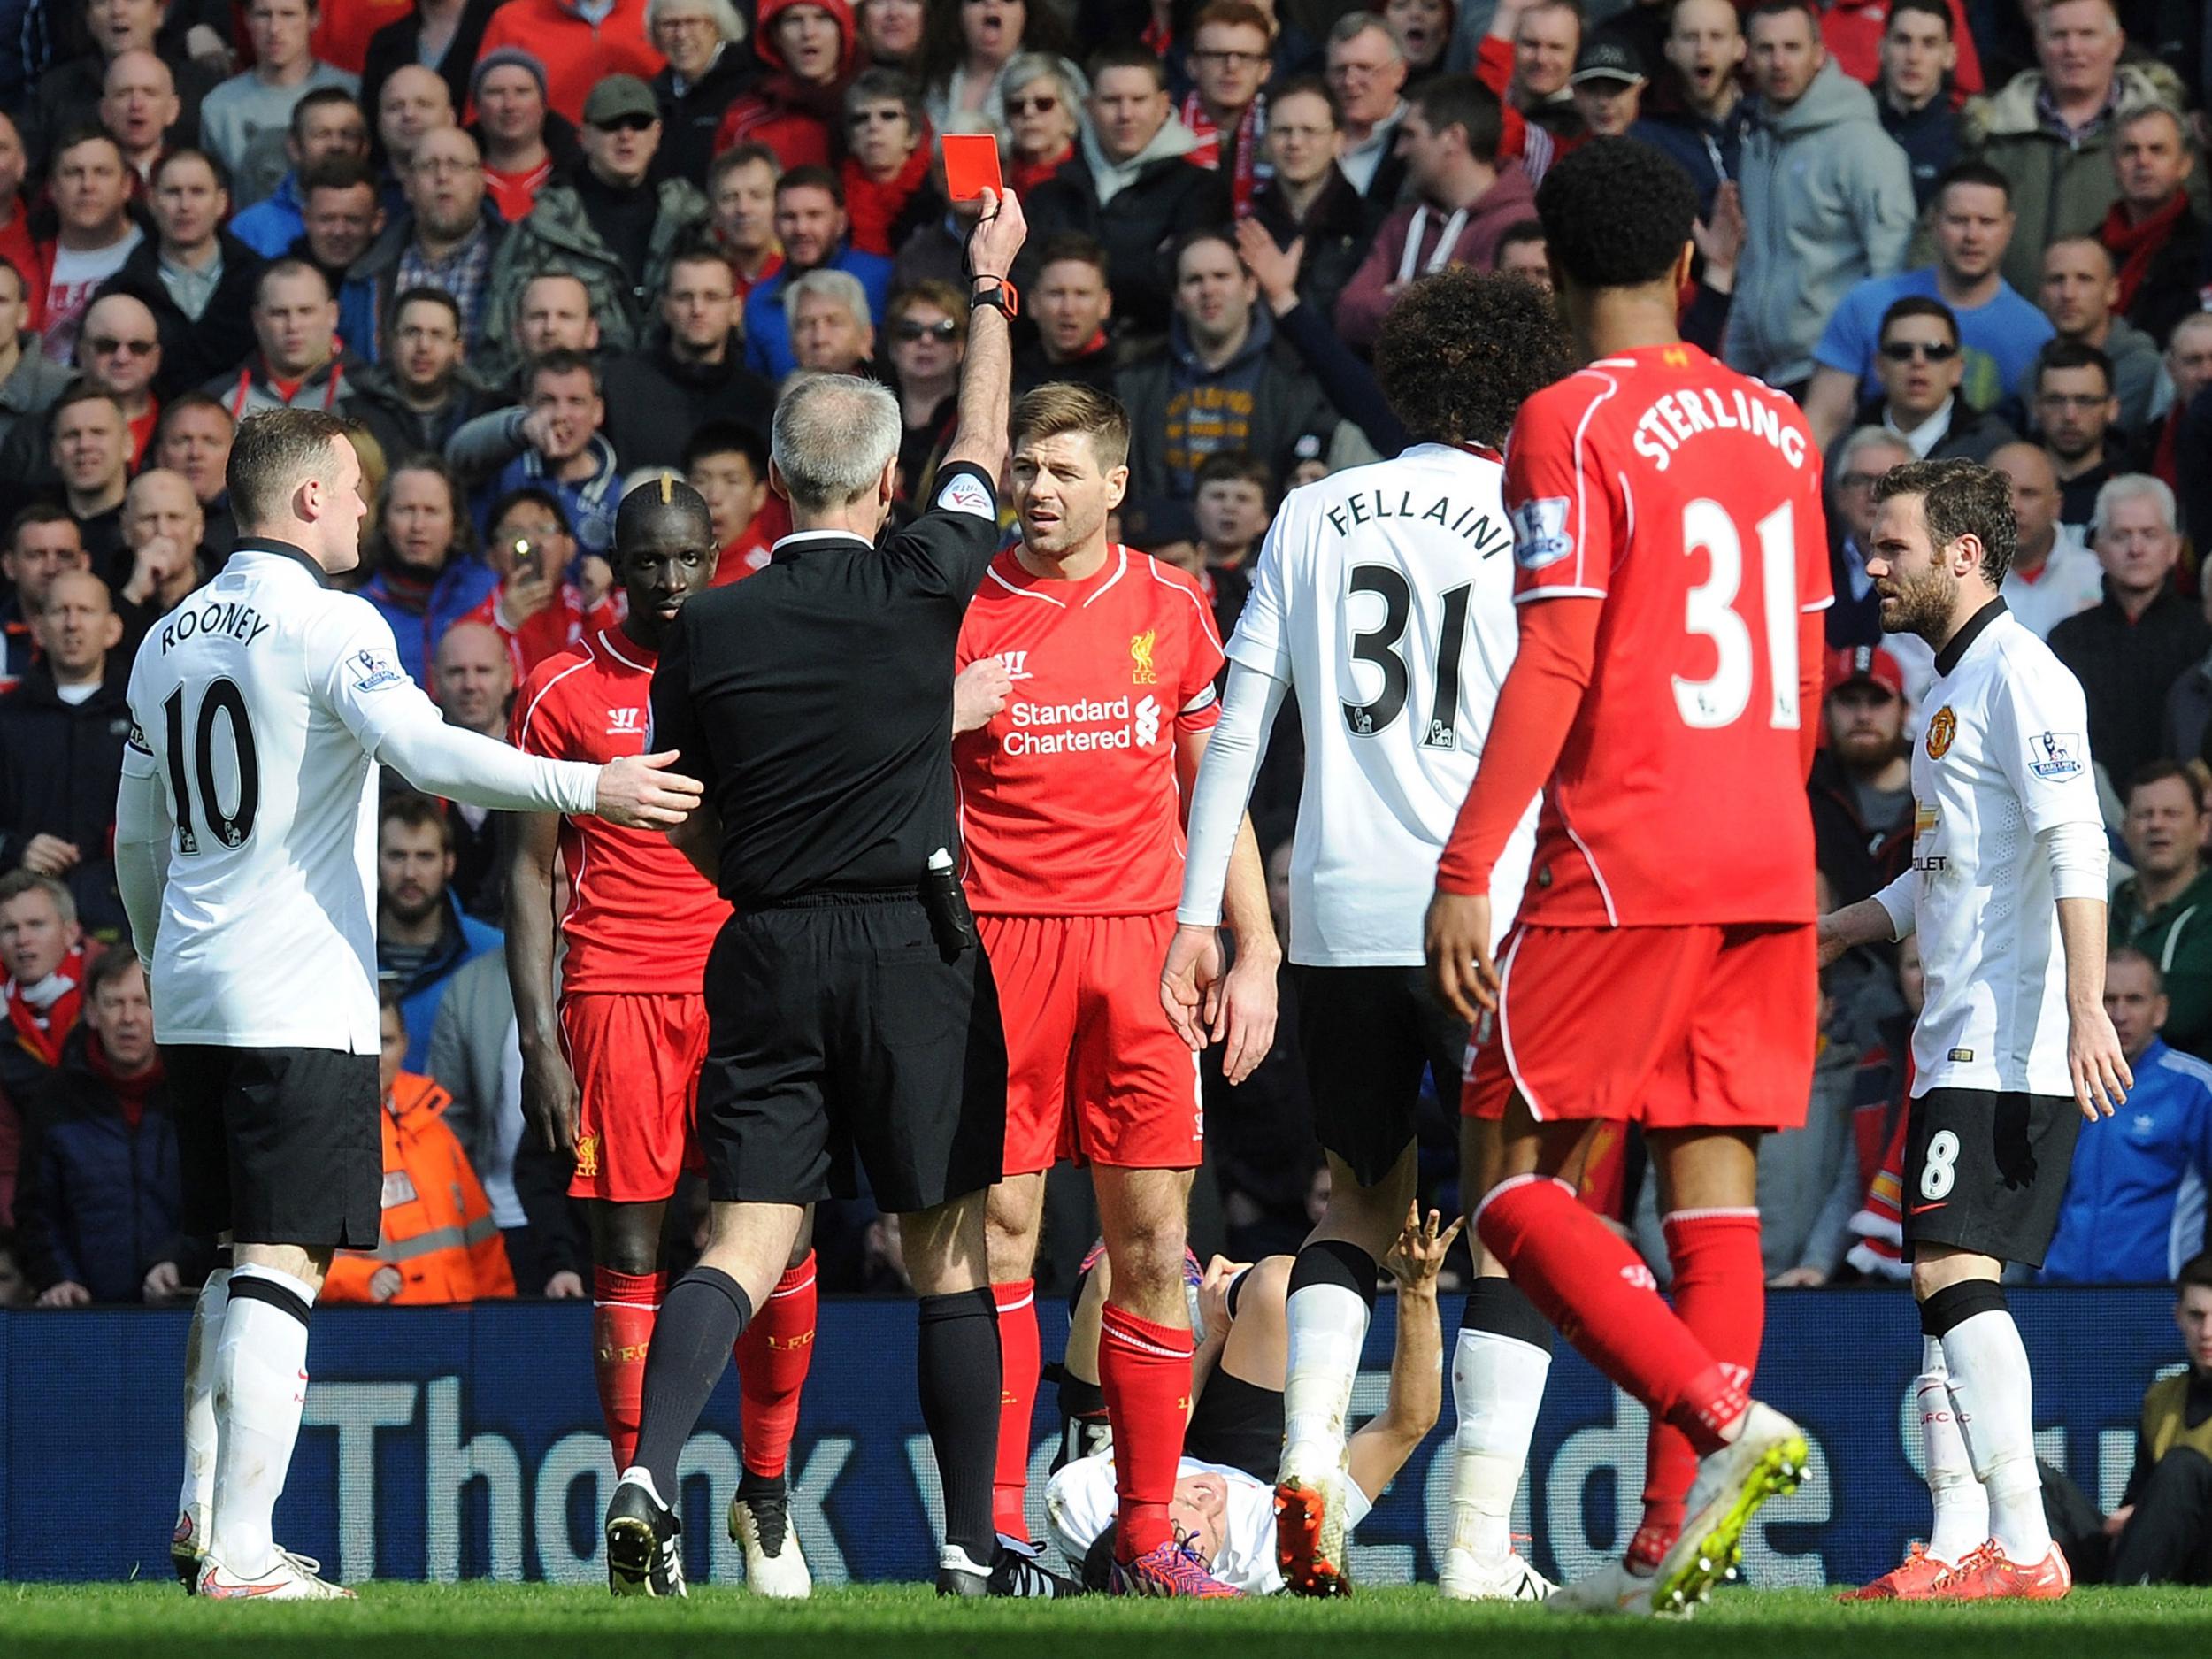 Martin Atkinson sends Liverpool's Steven Gerrard off against Manchester United in March 2015